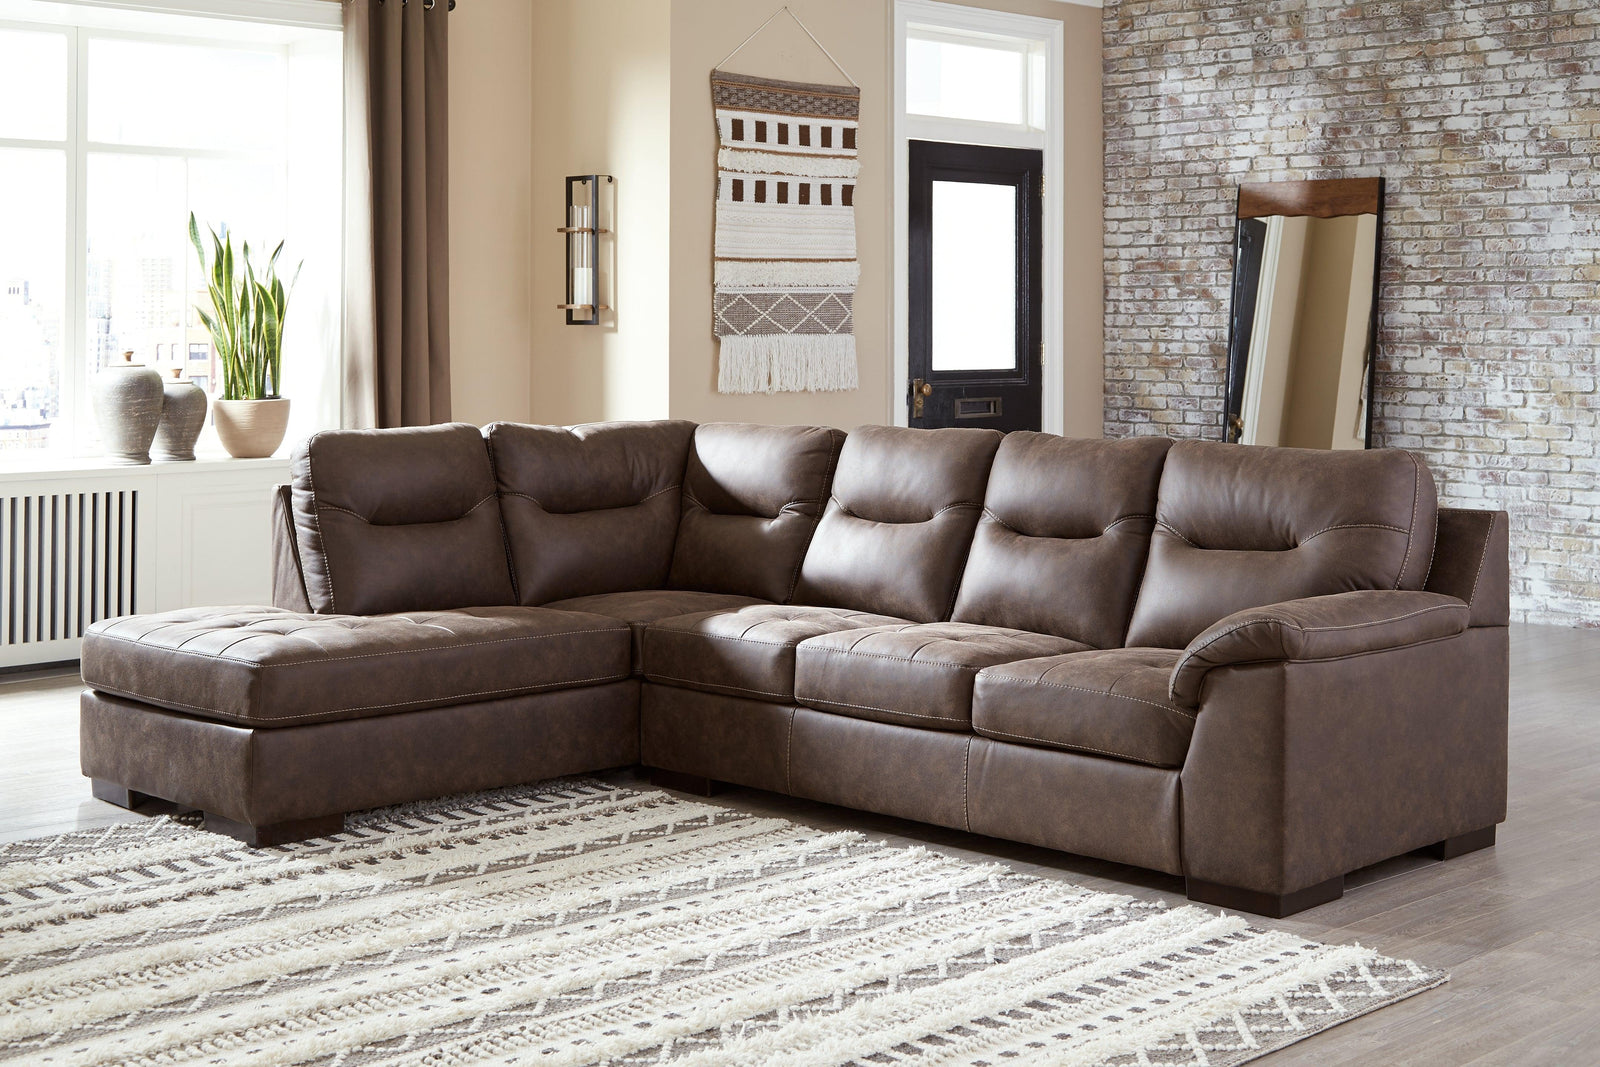 Maderla Walnut 2-Piece Sectional With Chaise